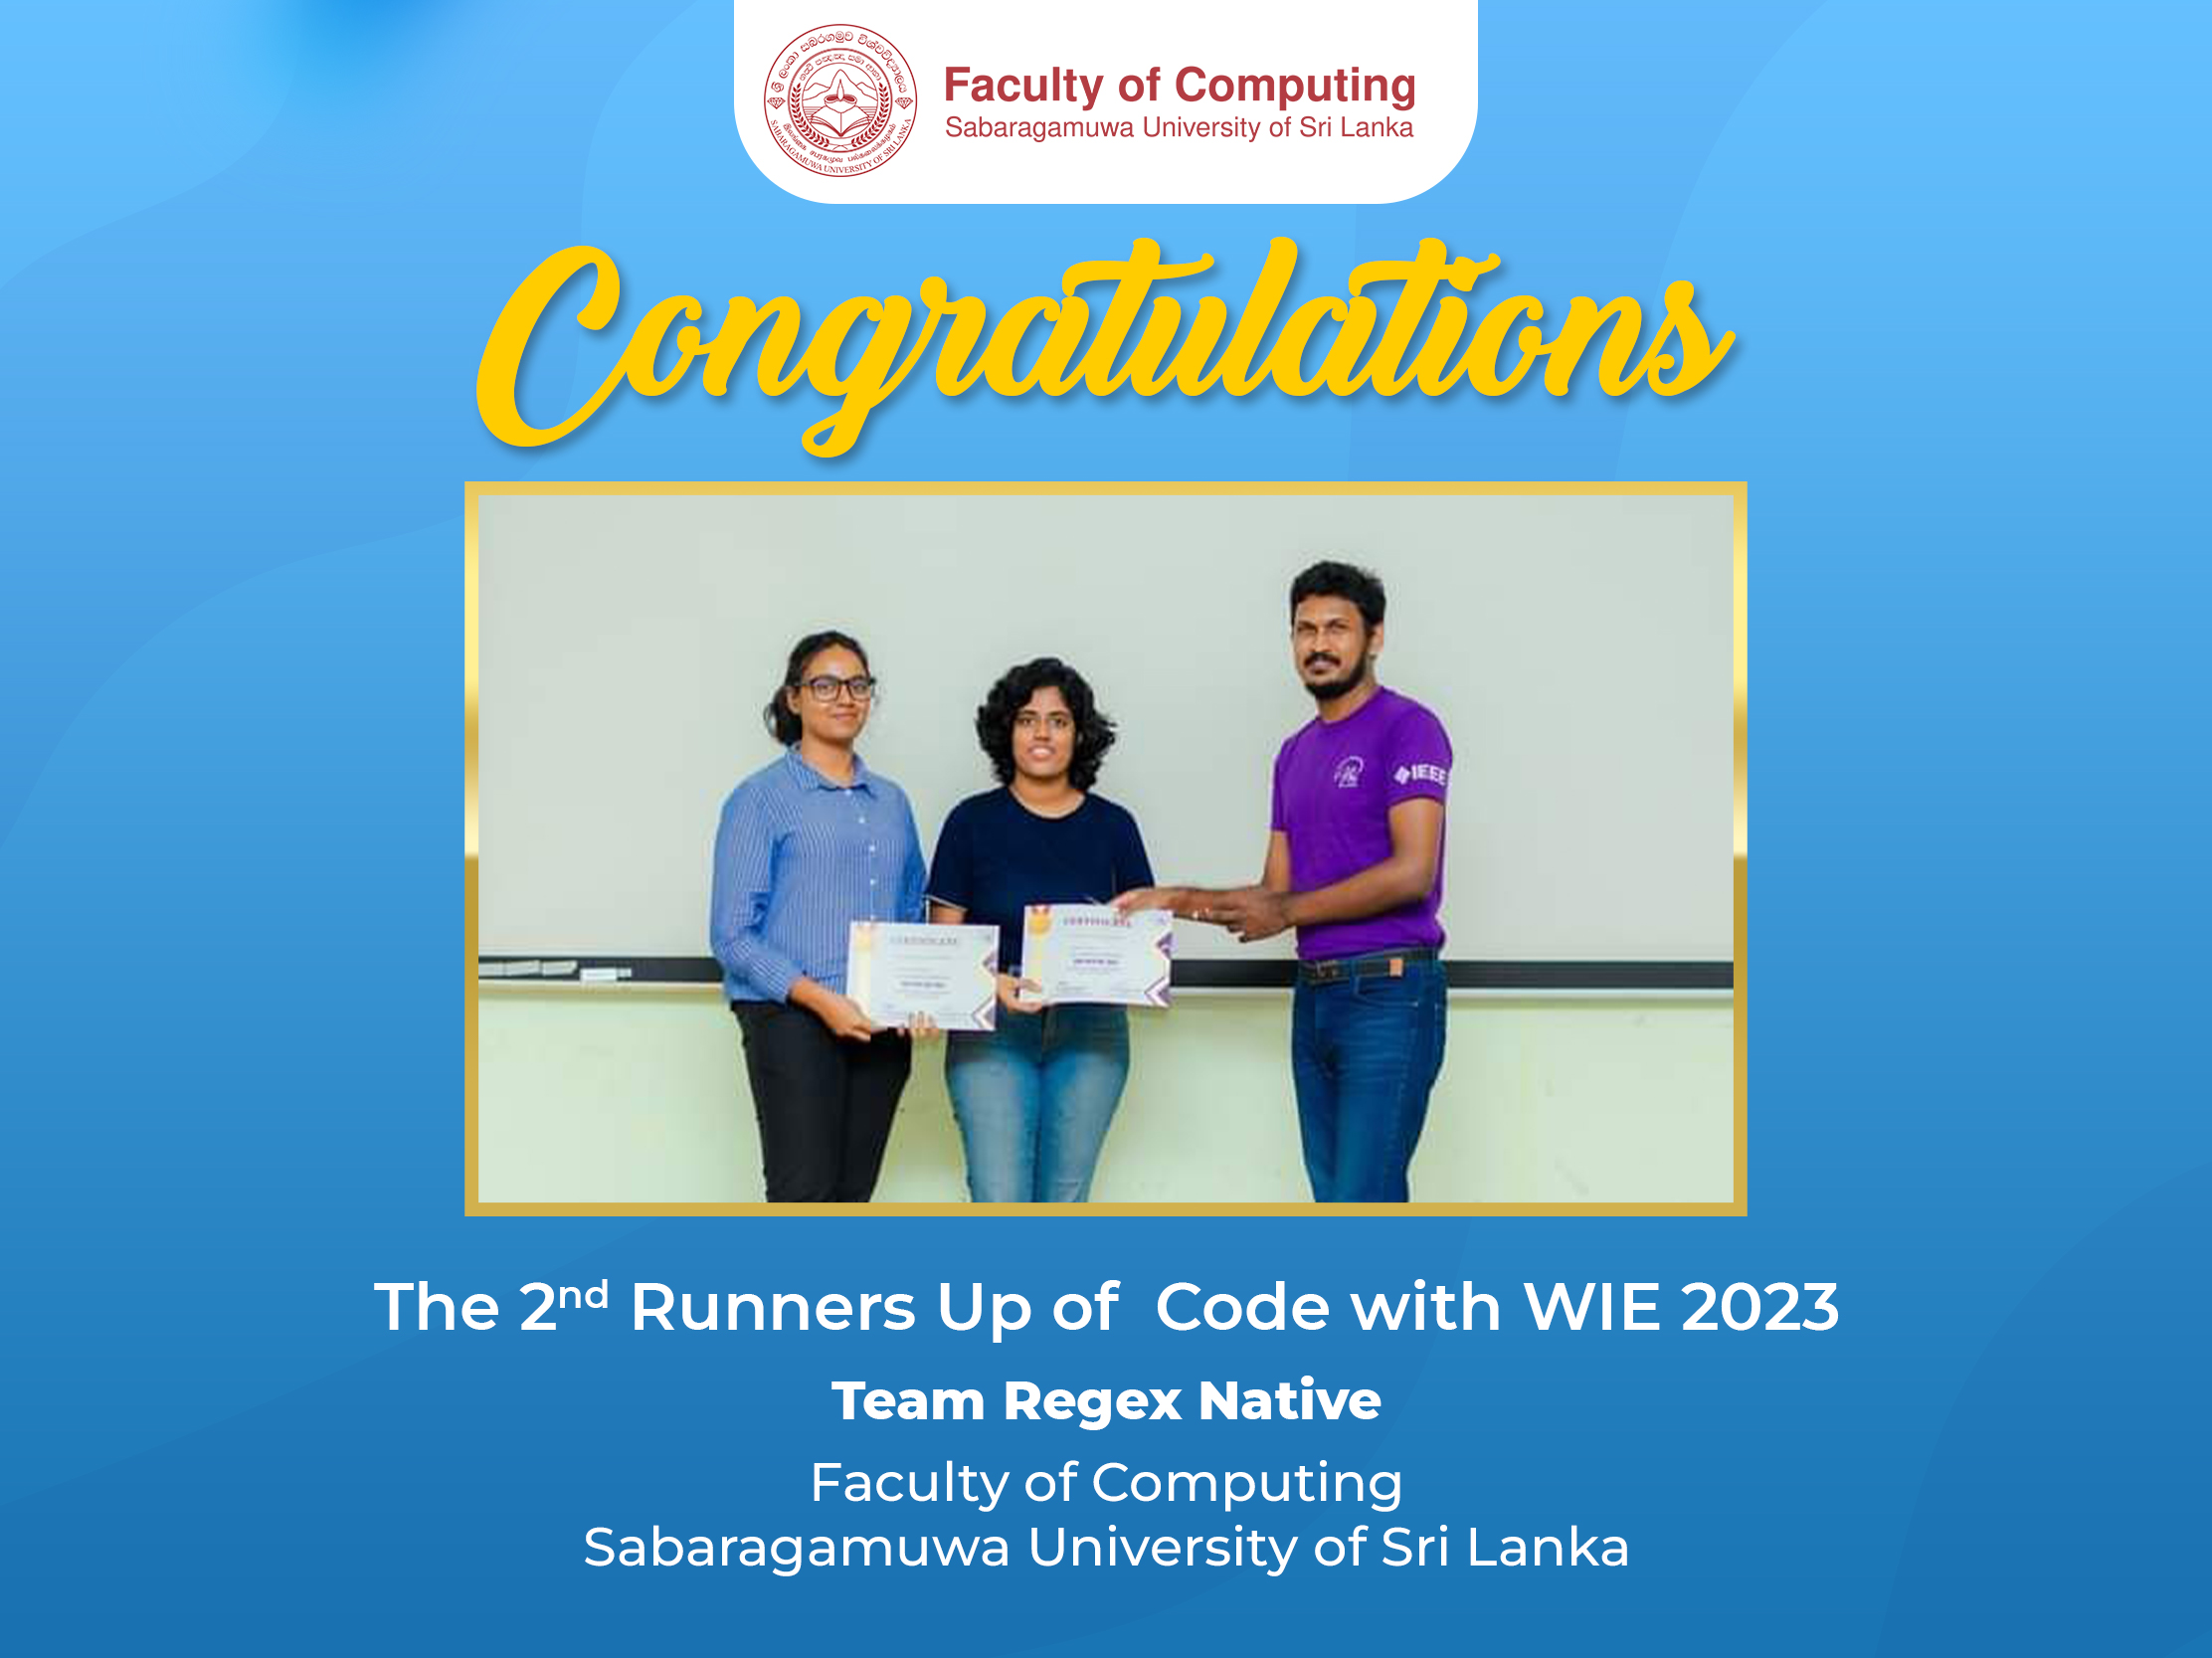 Team Regex Native - Second Runners Up of Code with WIE 2023